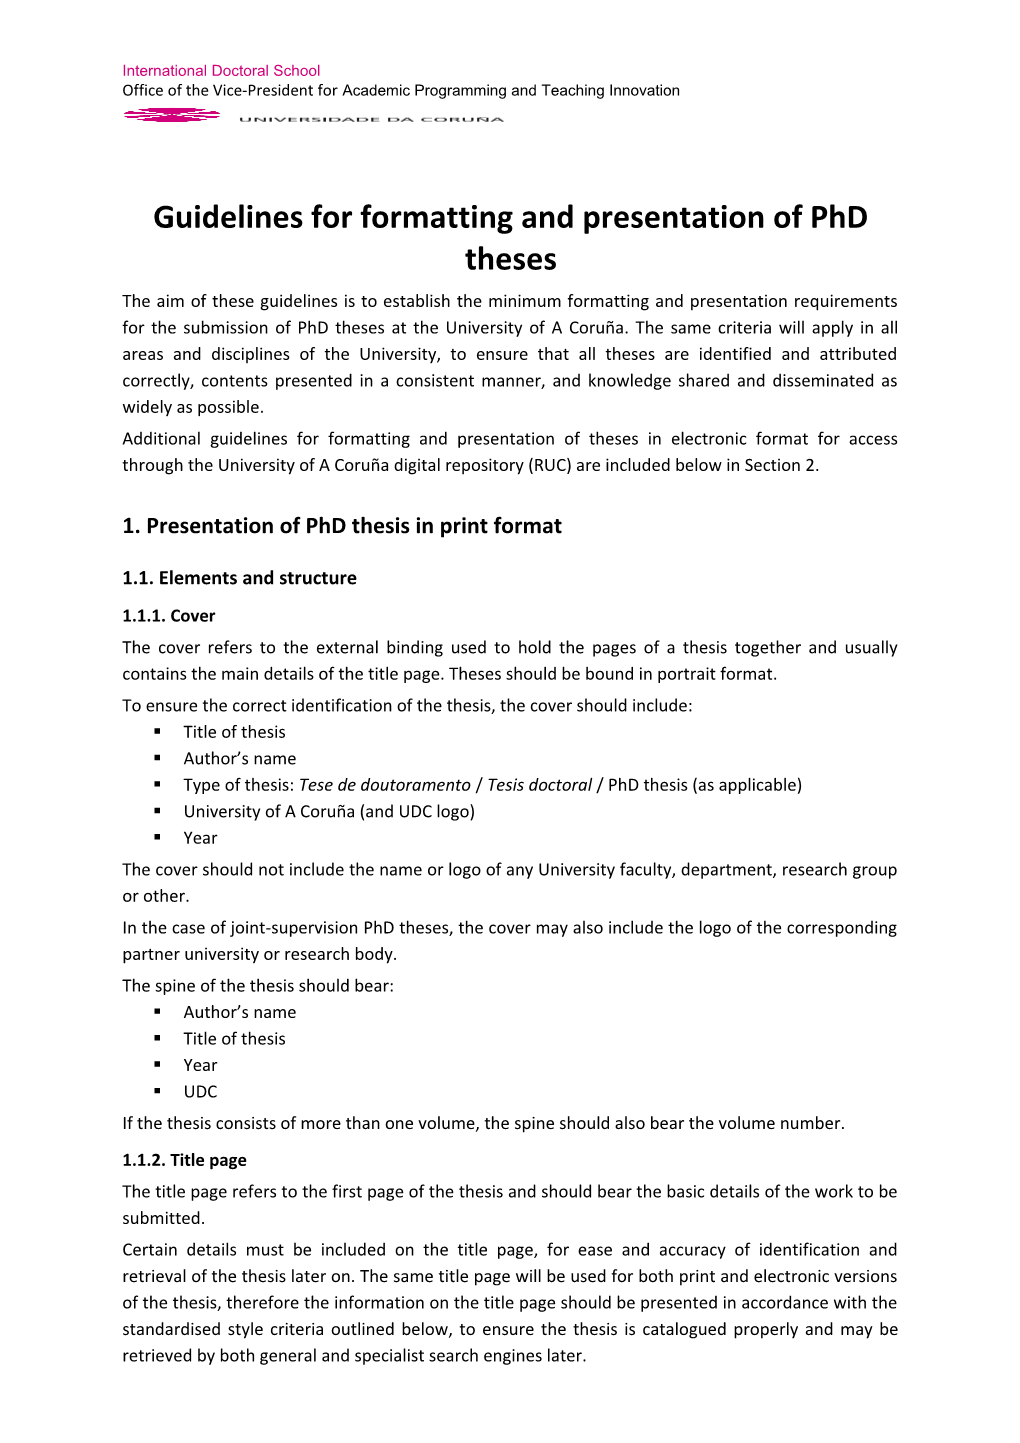 Guidelines for Formatting and Presentation of Phd Theses